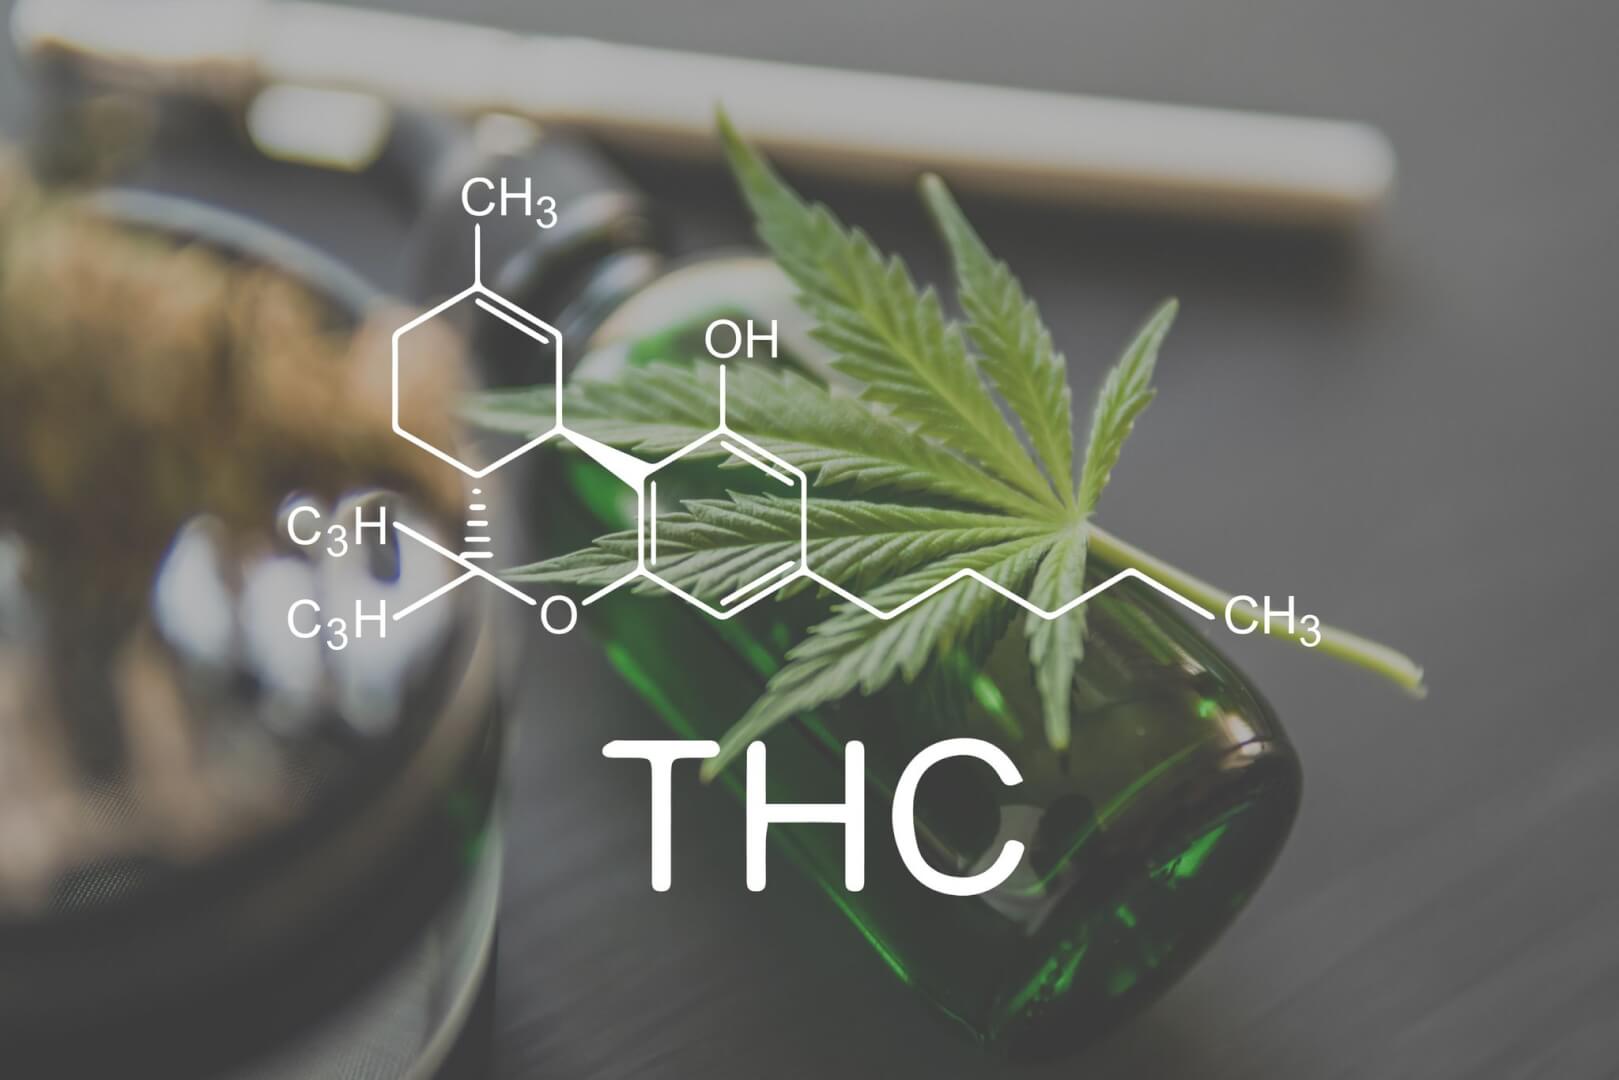 What Is Considered High THC Levels in Cannabis Plants